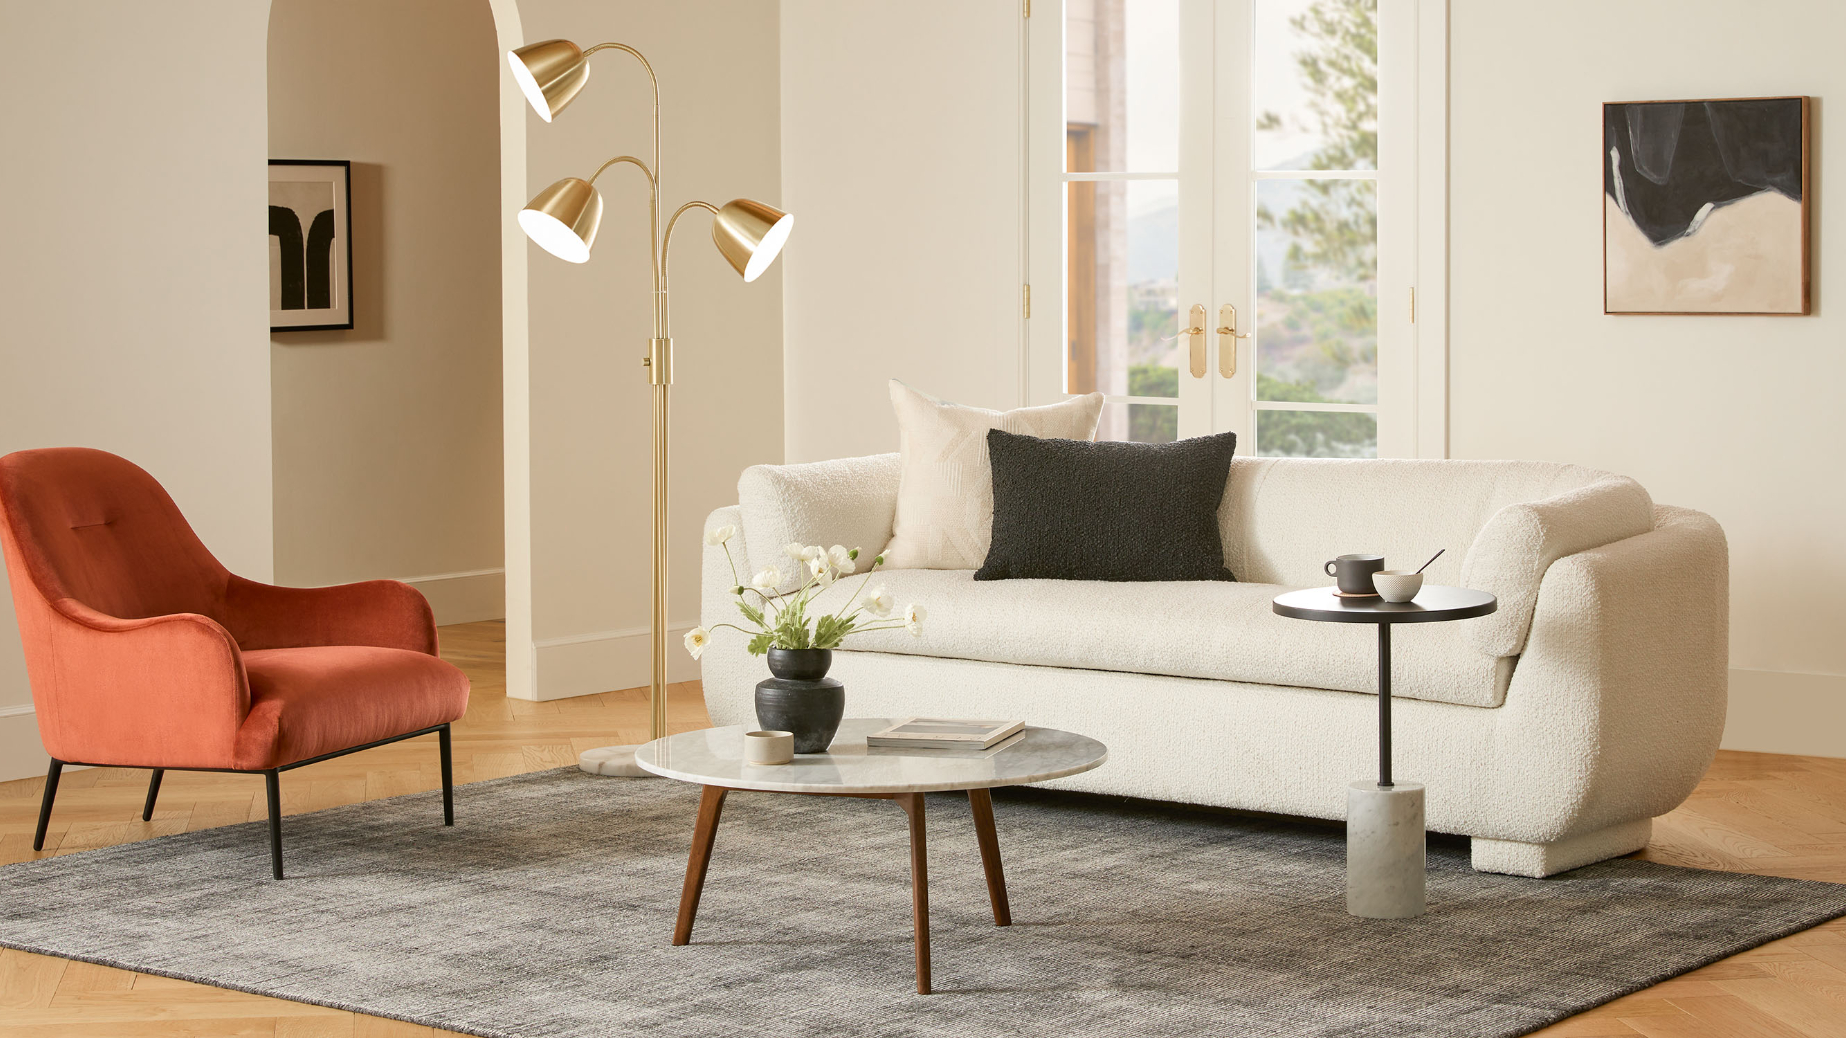 Article Lunaria White Boucle sofa in living room